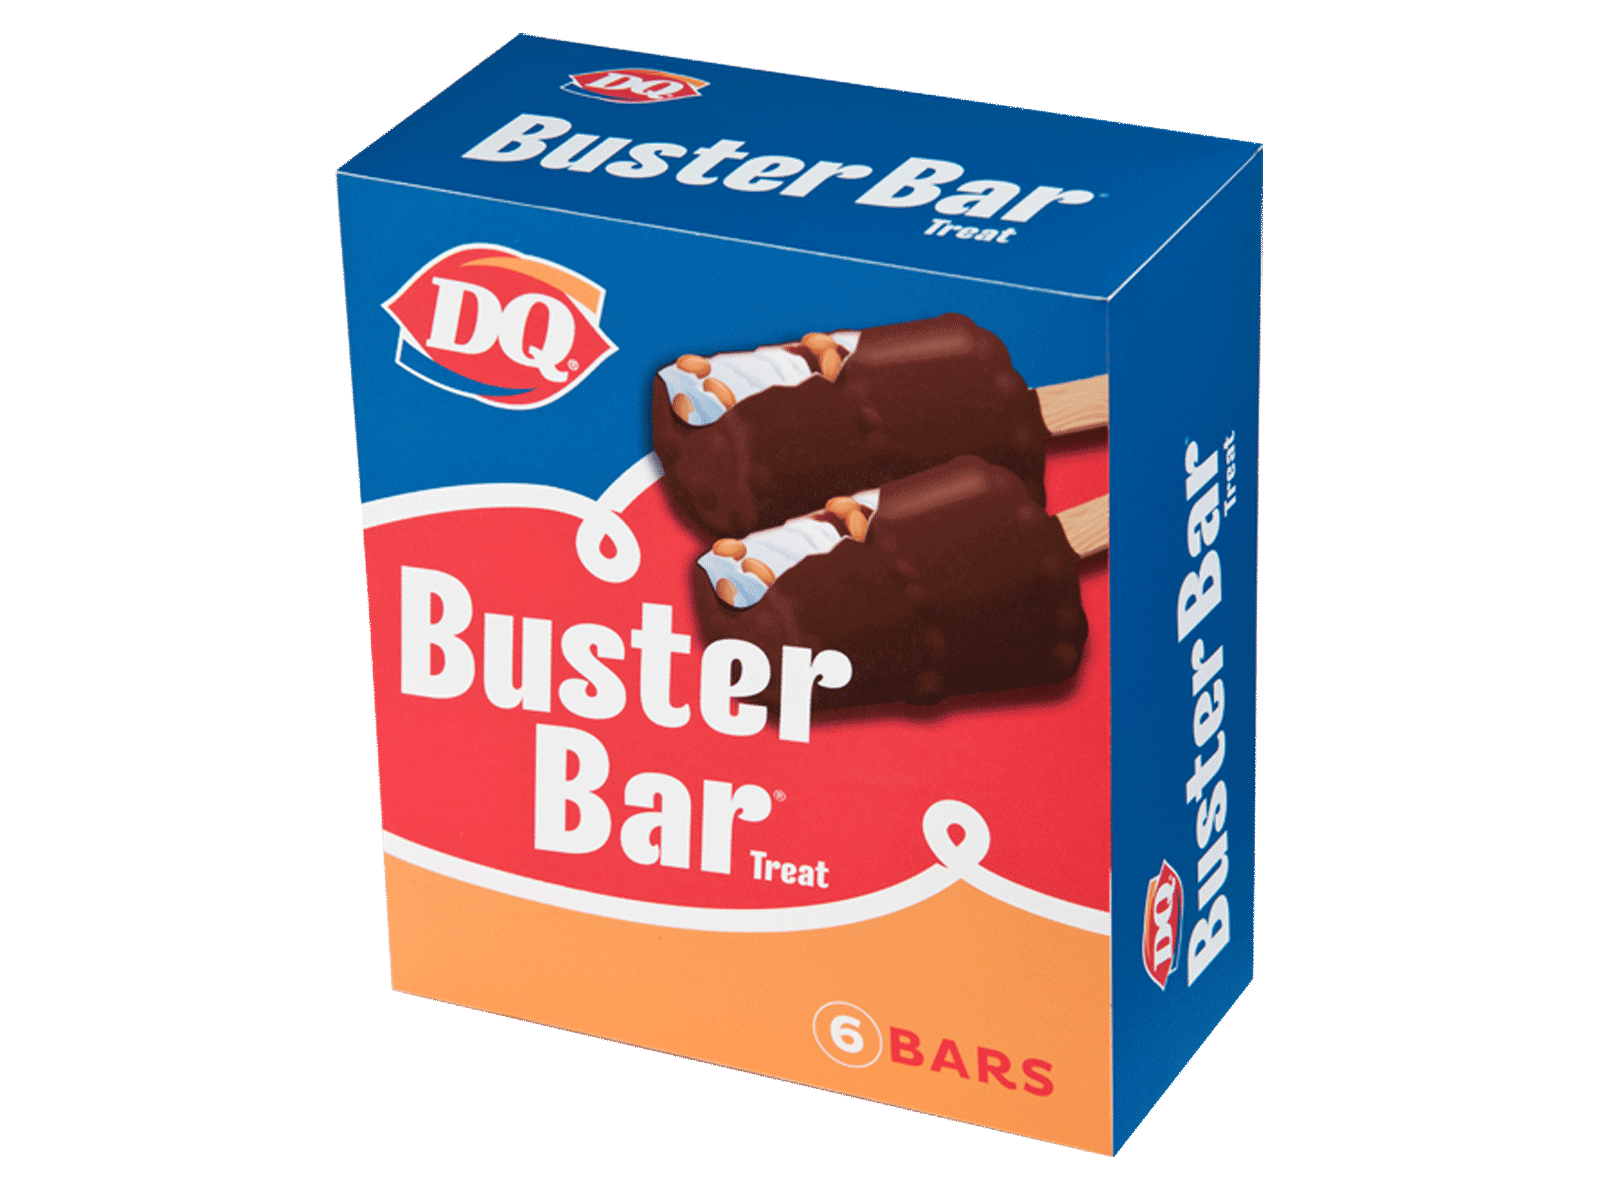 dairy queen buster bar history